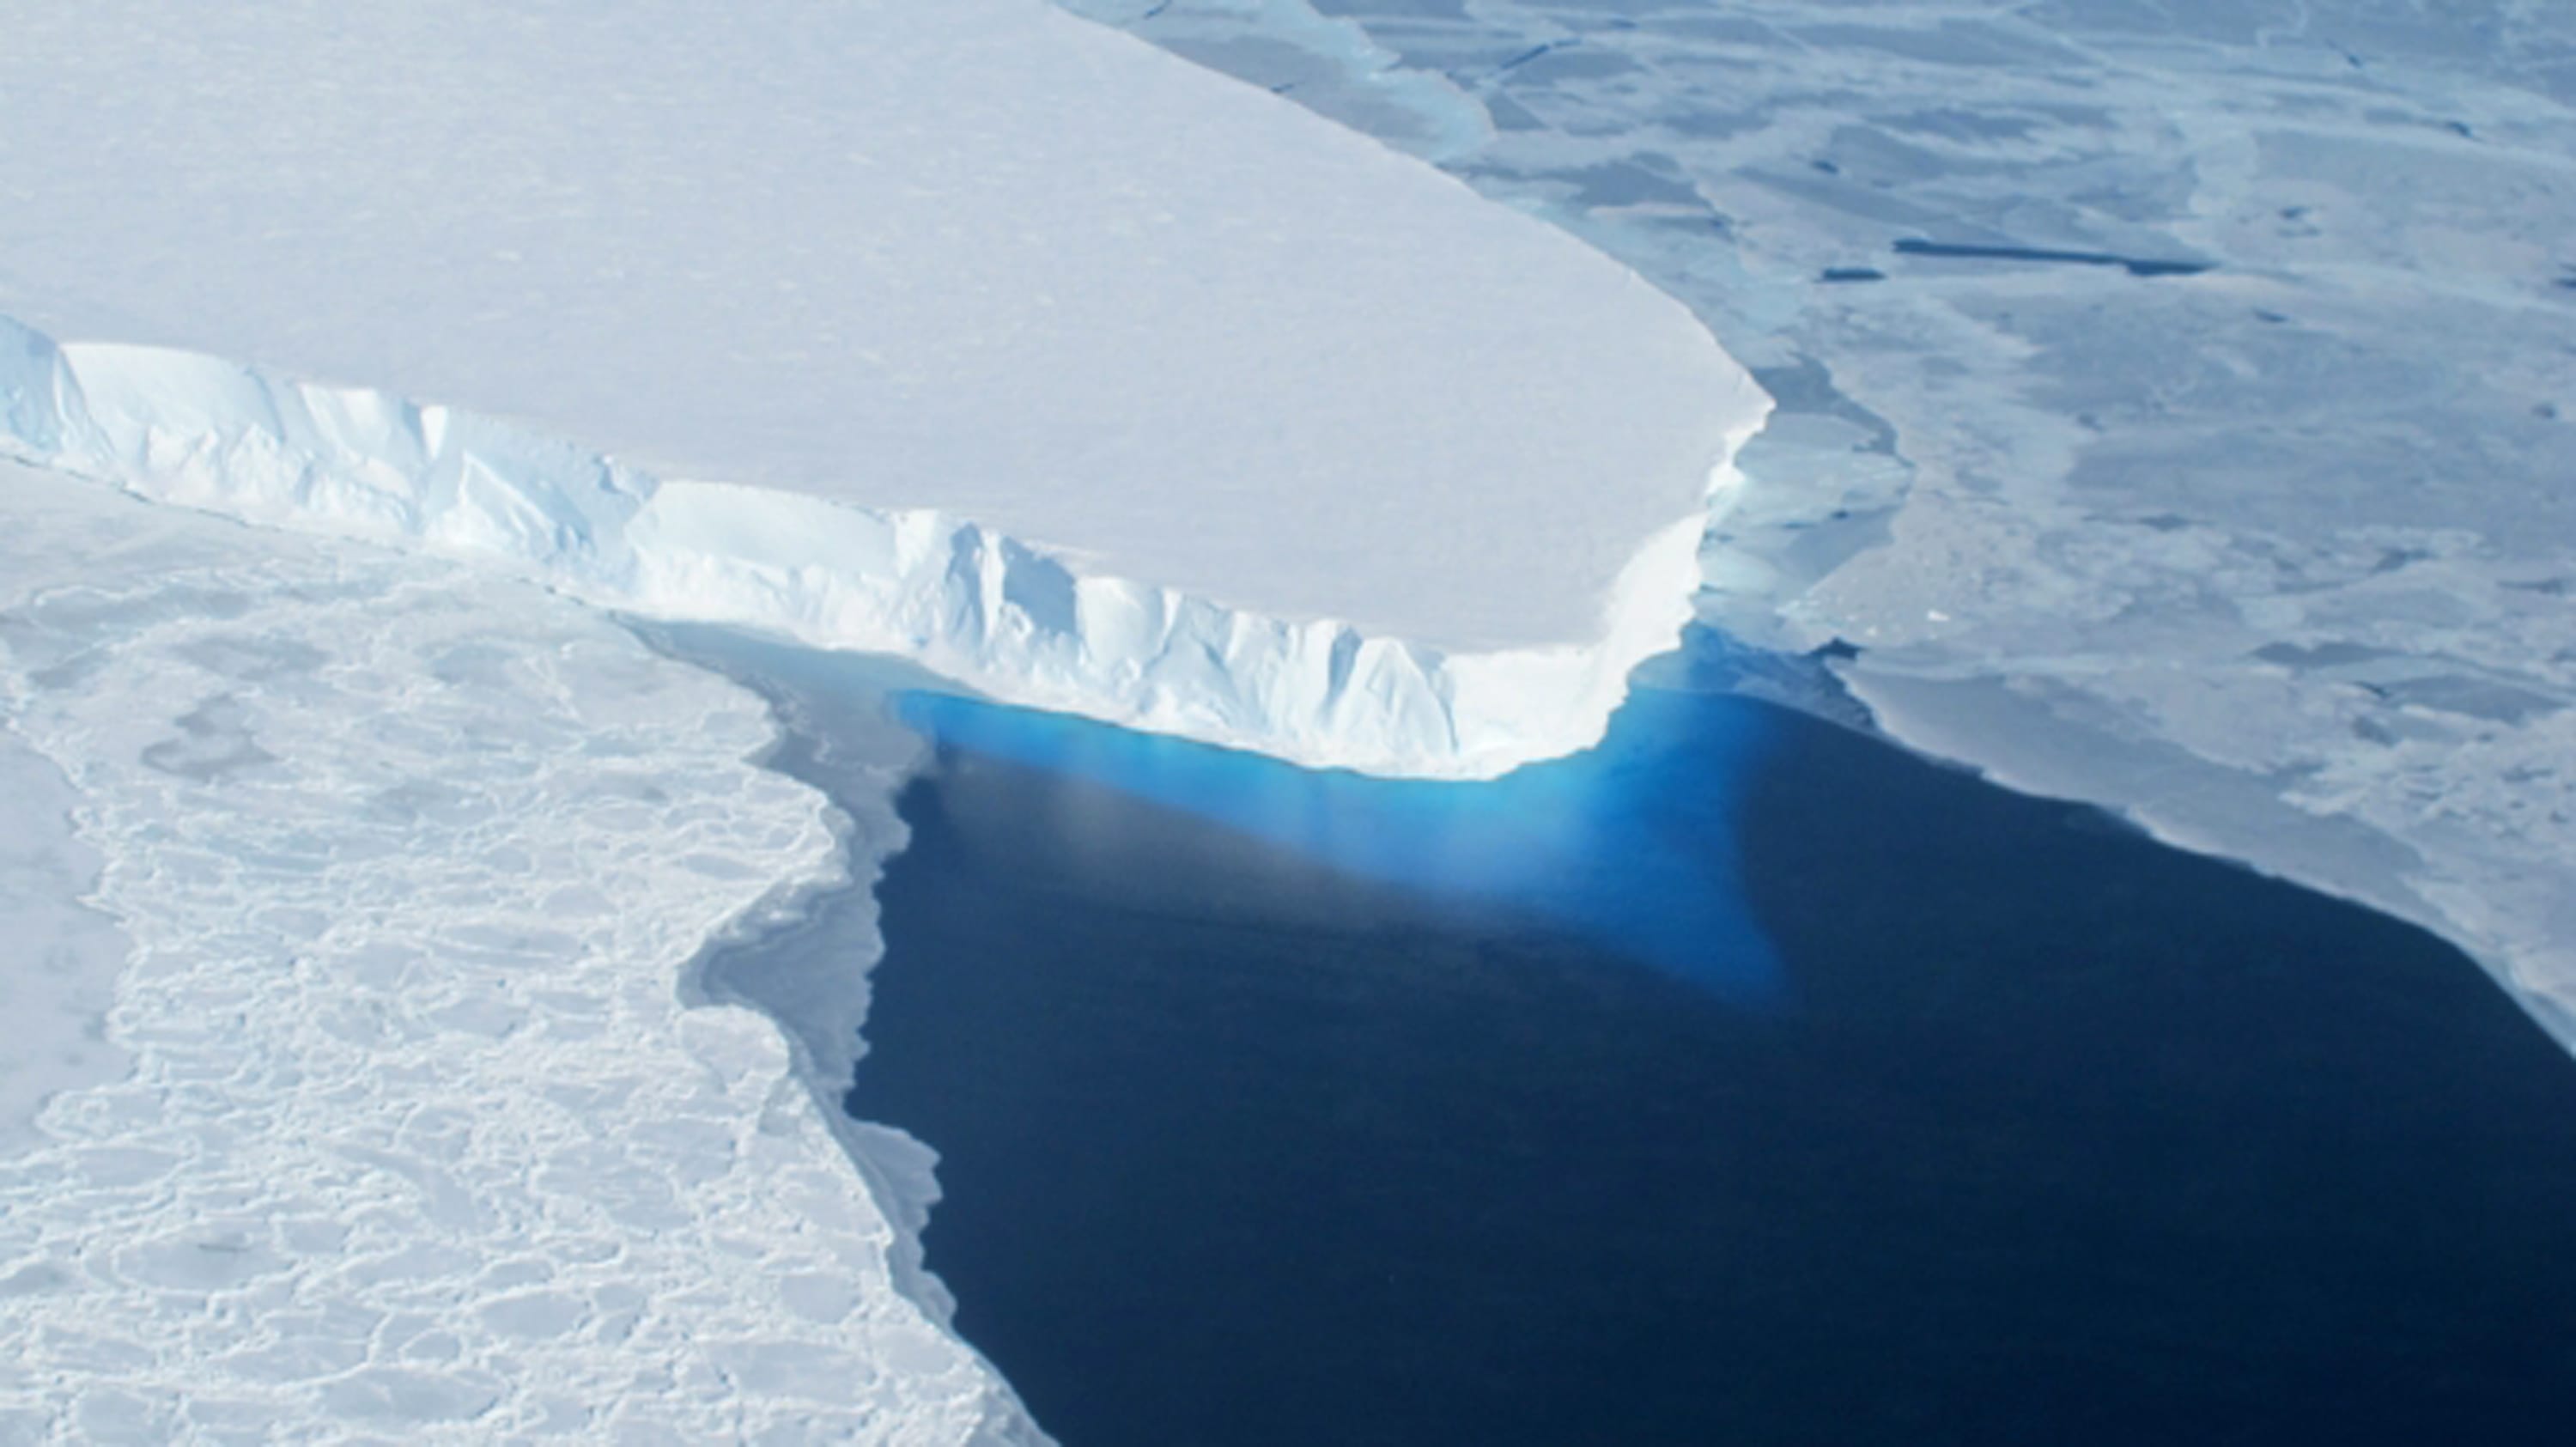 NASA
Two new studies indicate that part of the huge West Antarctic ice sheet is starting a slow collapse in an unstoppable manner.